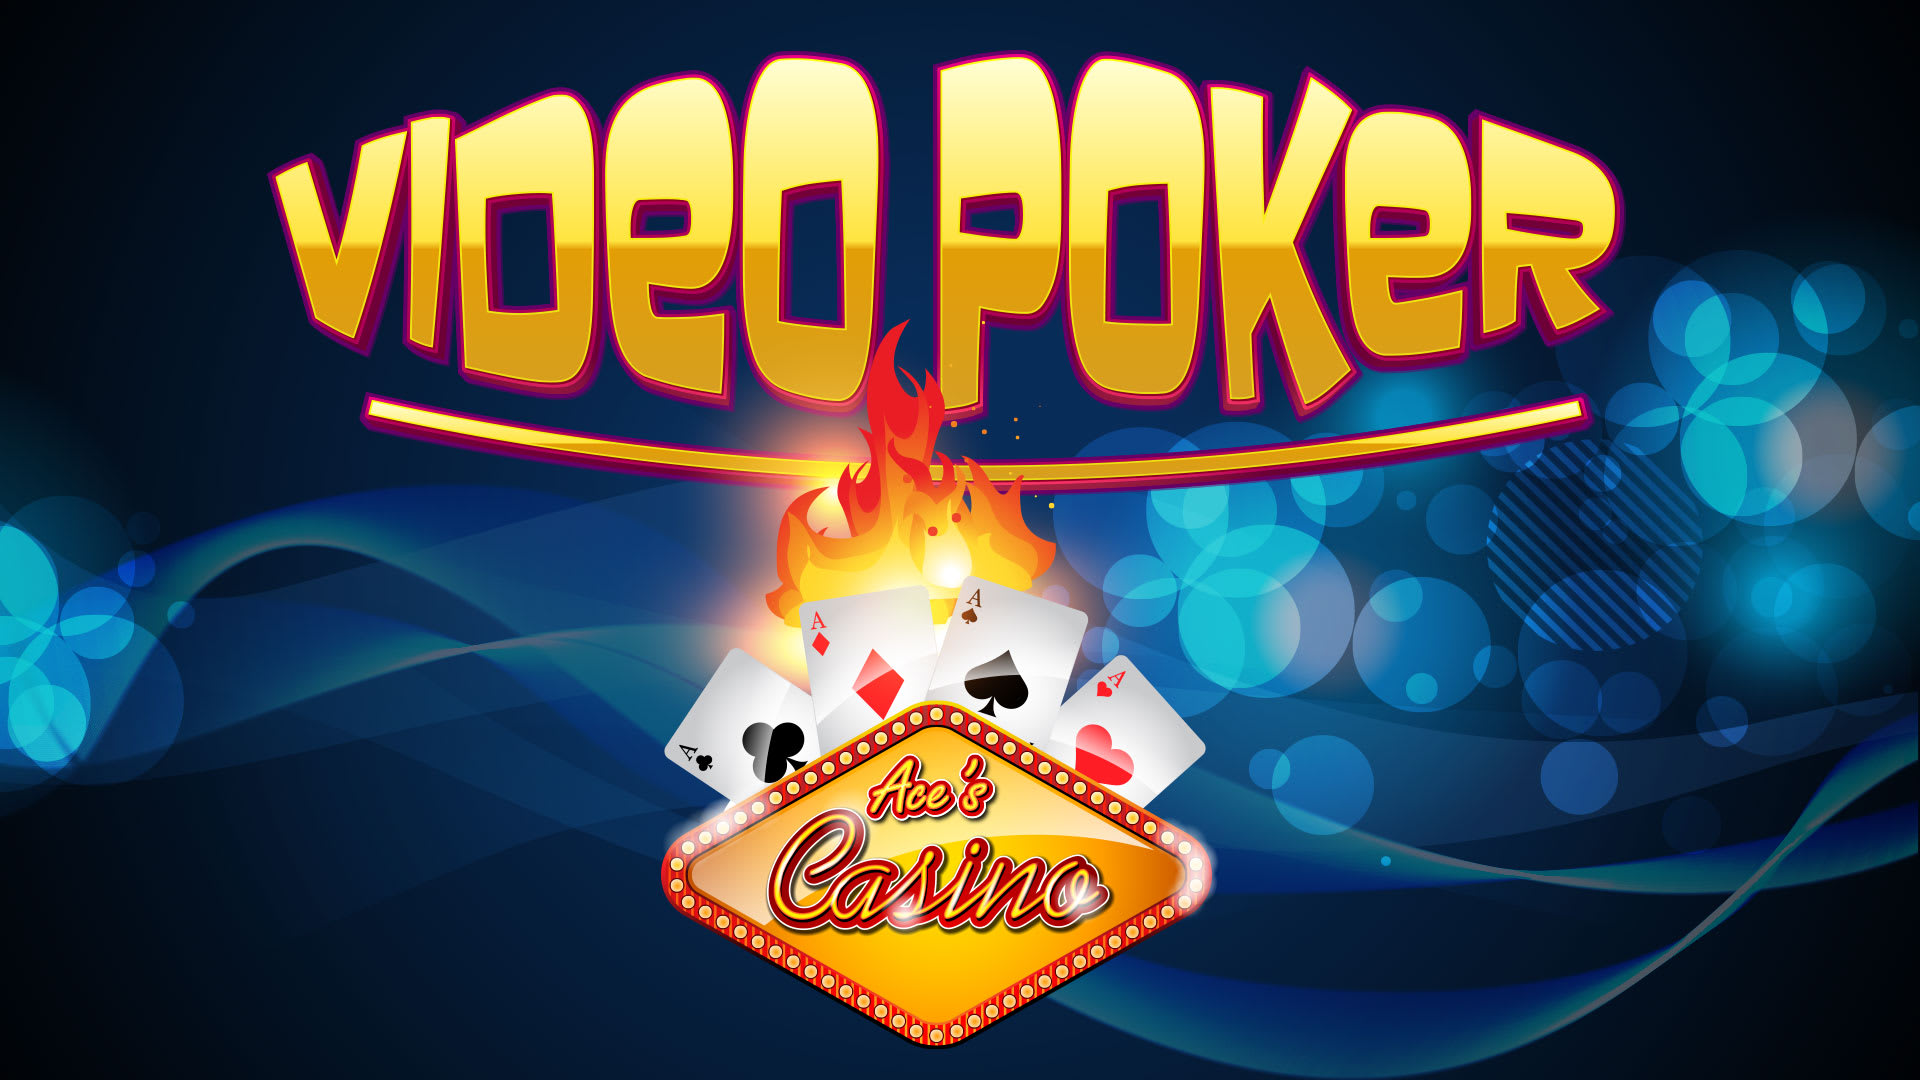 Video Poker at Aces Casino